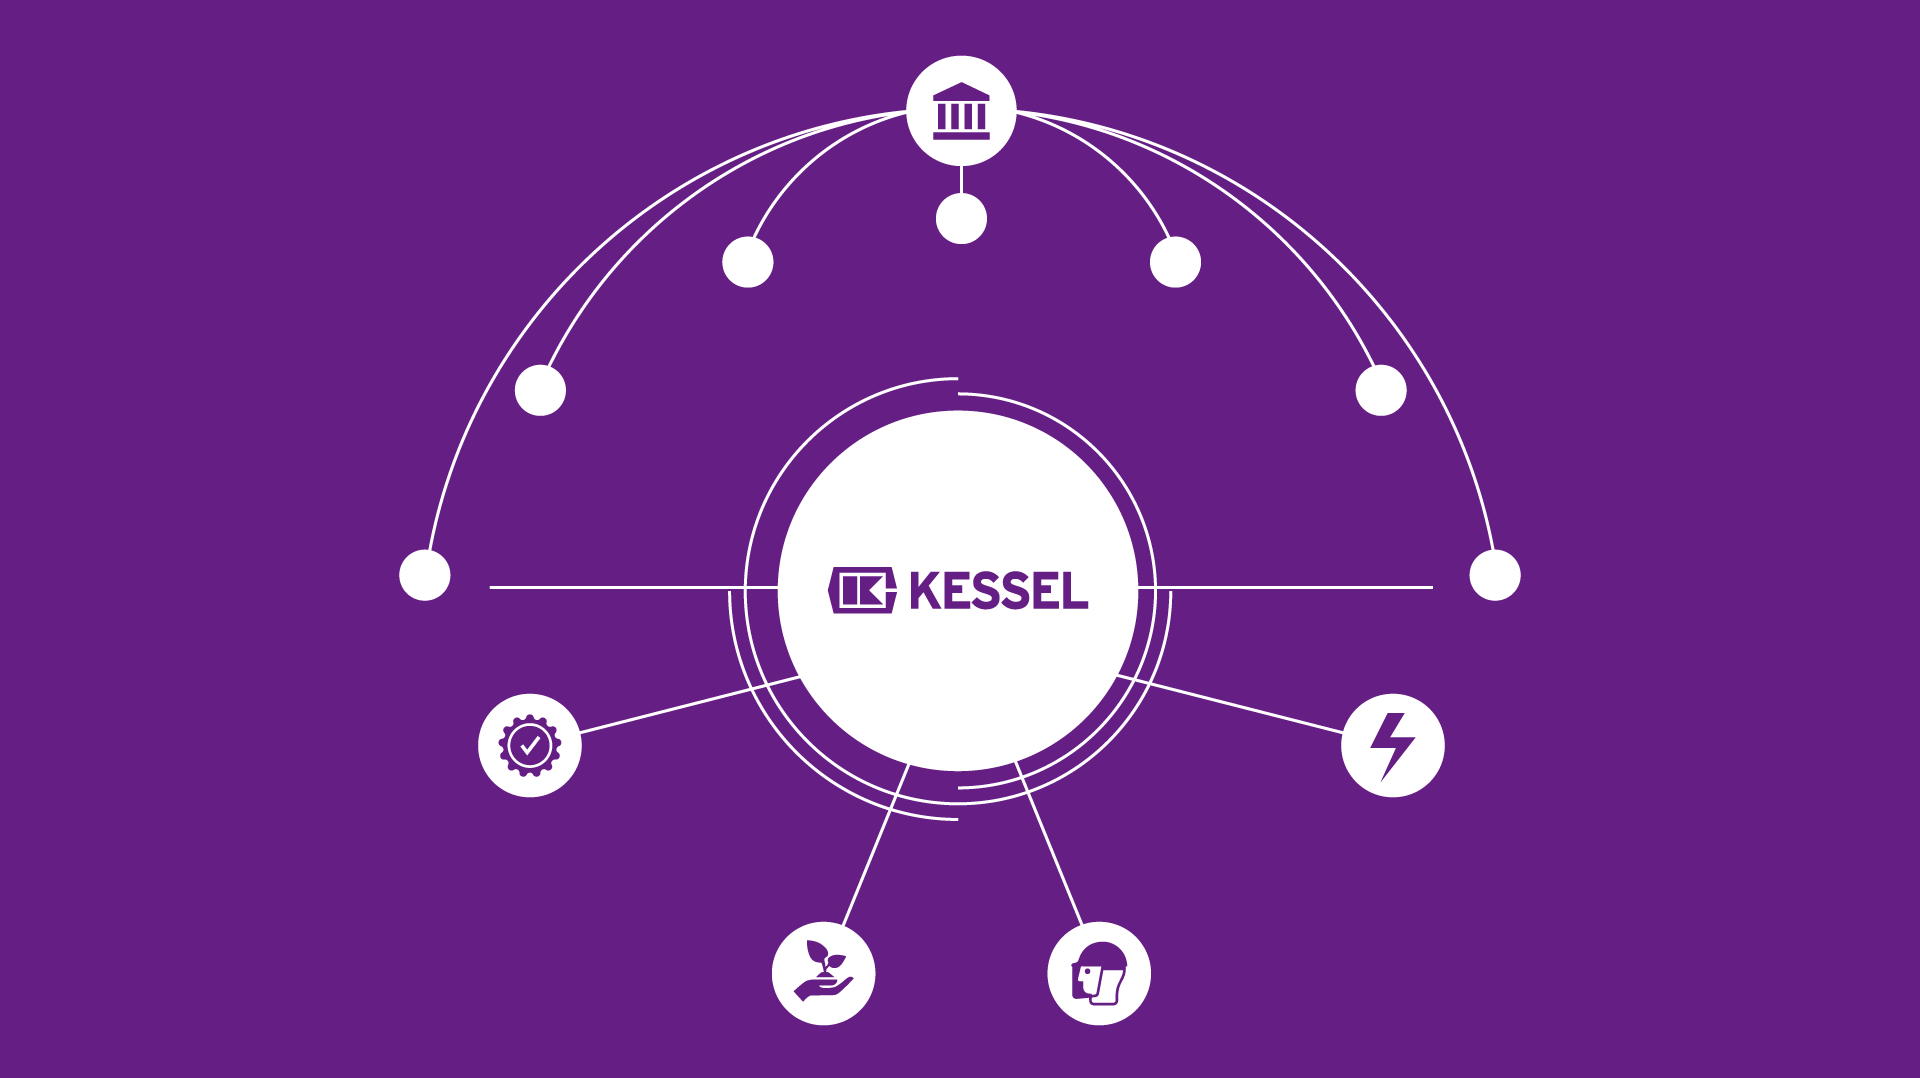 The policy underpinning the integrated management system of KESSEL AG 